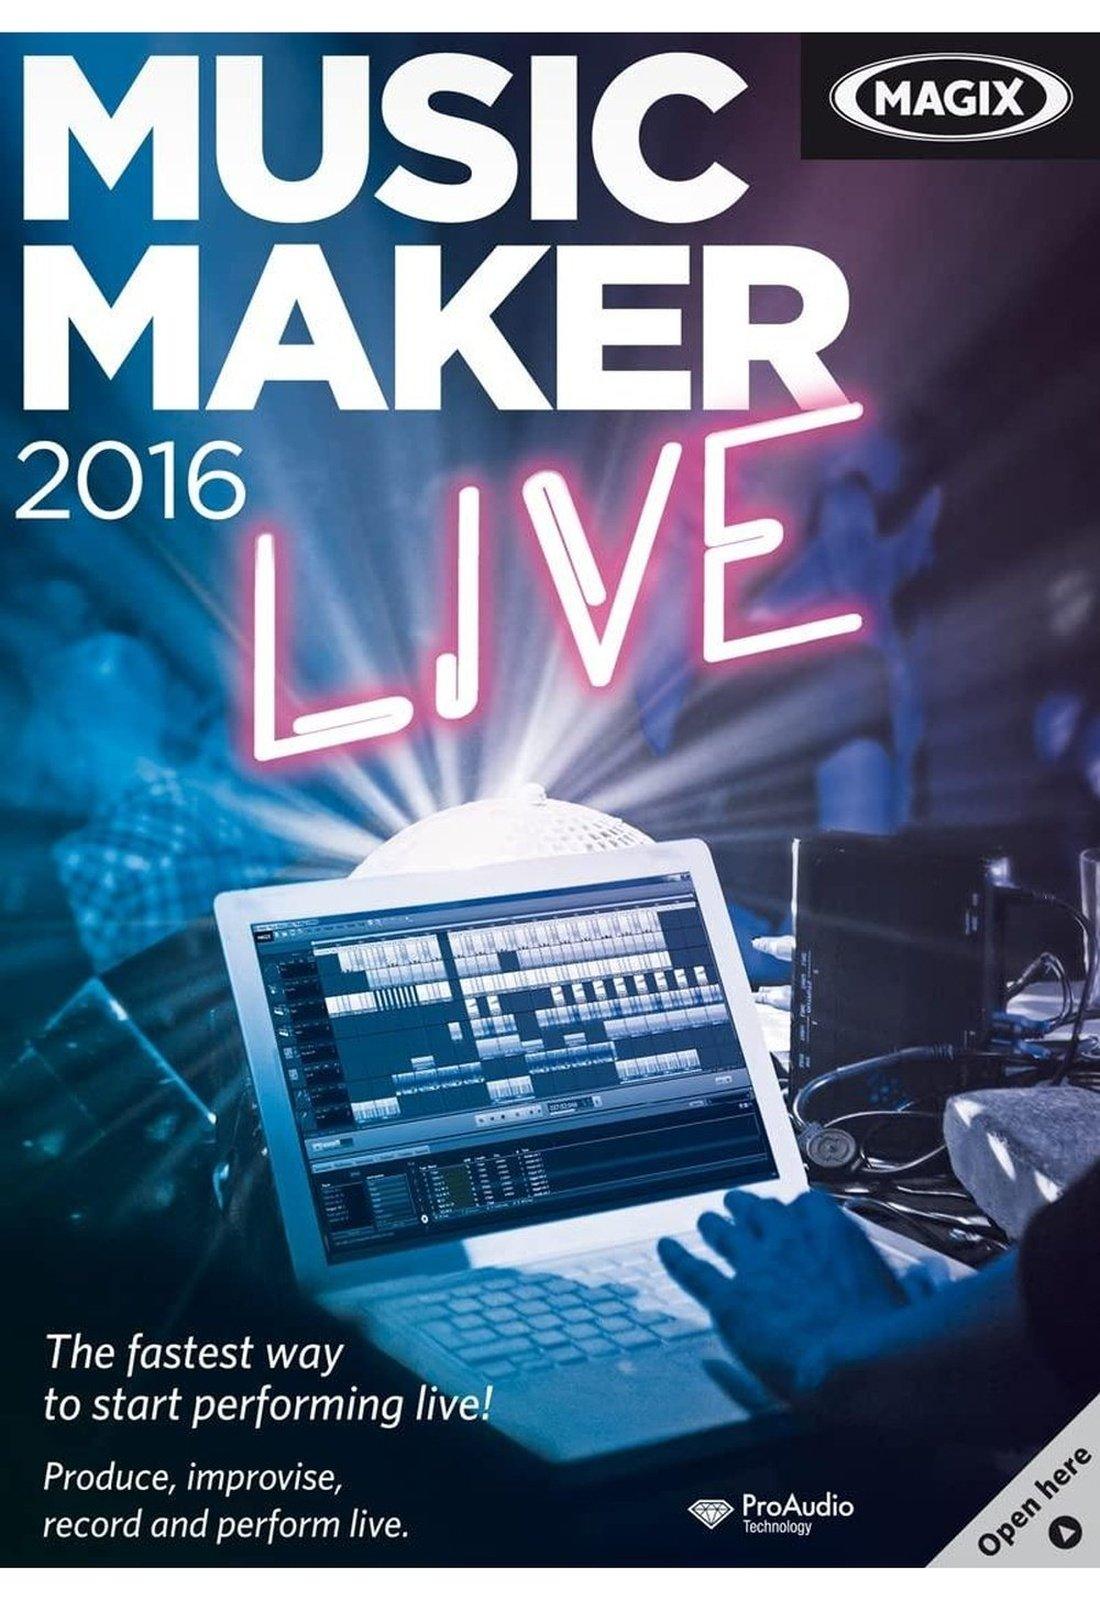 Magix Music Maker 2016 Live - Instant Download for Windows (1 Computer) - SoftwareCW - Authorized Reseller